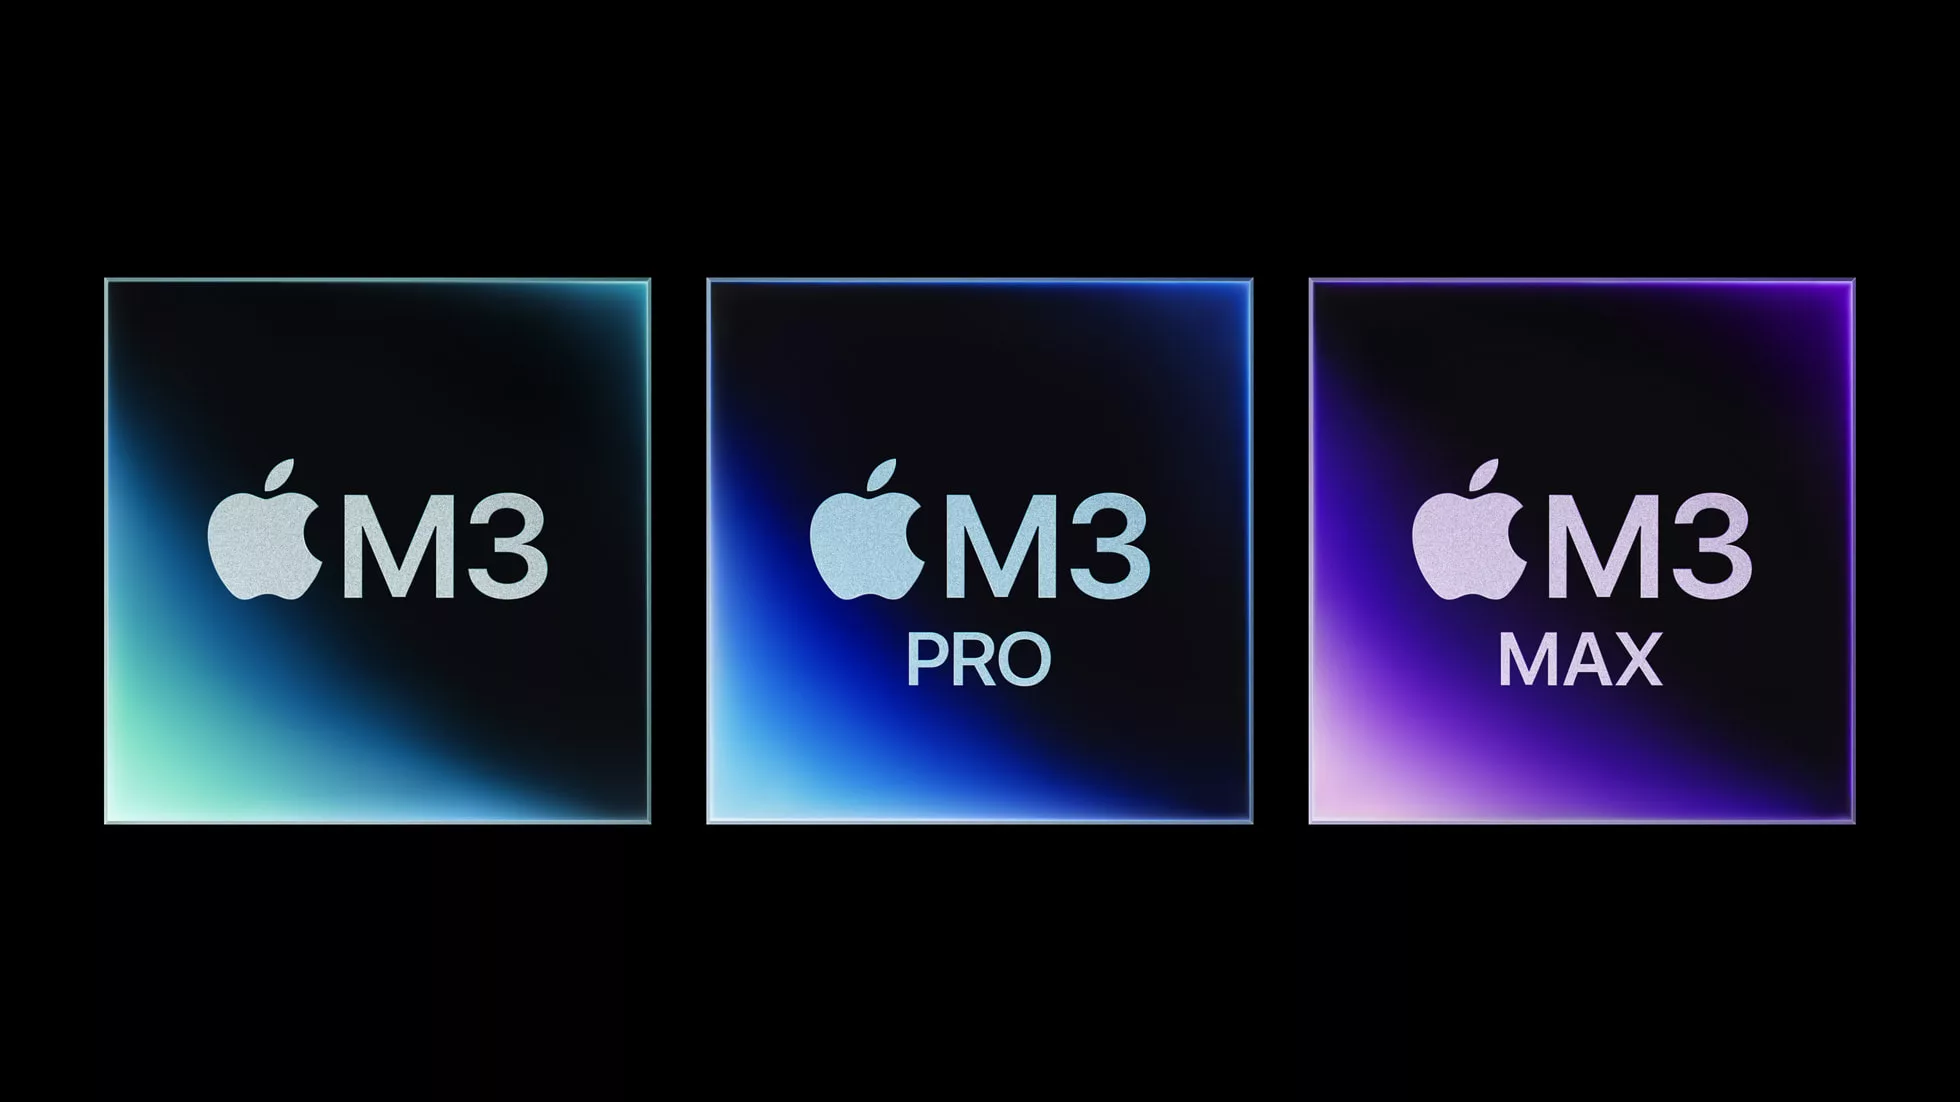 Apple M3 family of processors with AV1 video decoding support, M3, M3 Pro and M3 Max